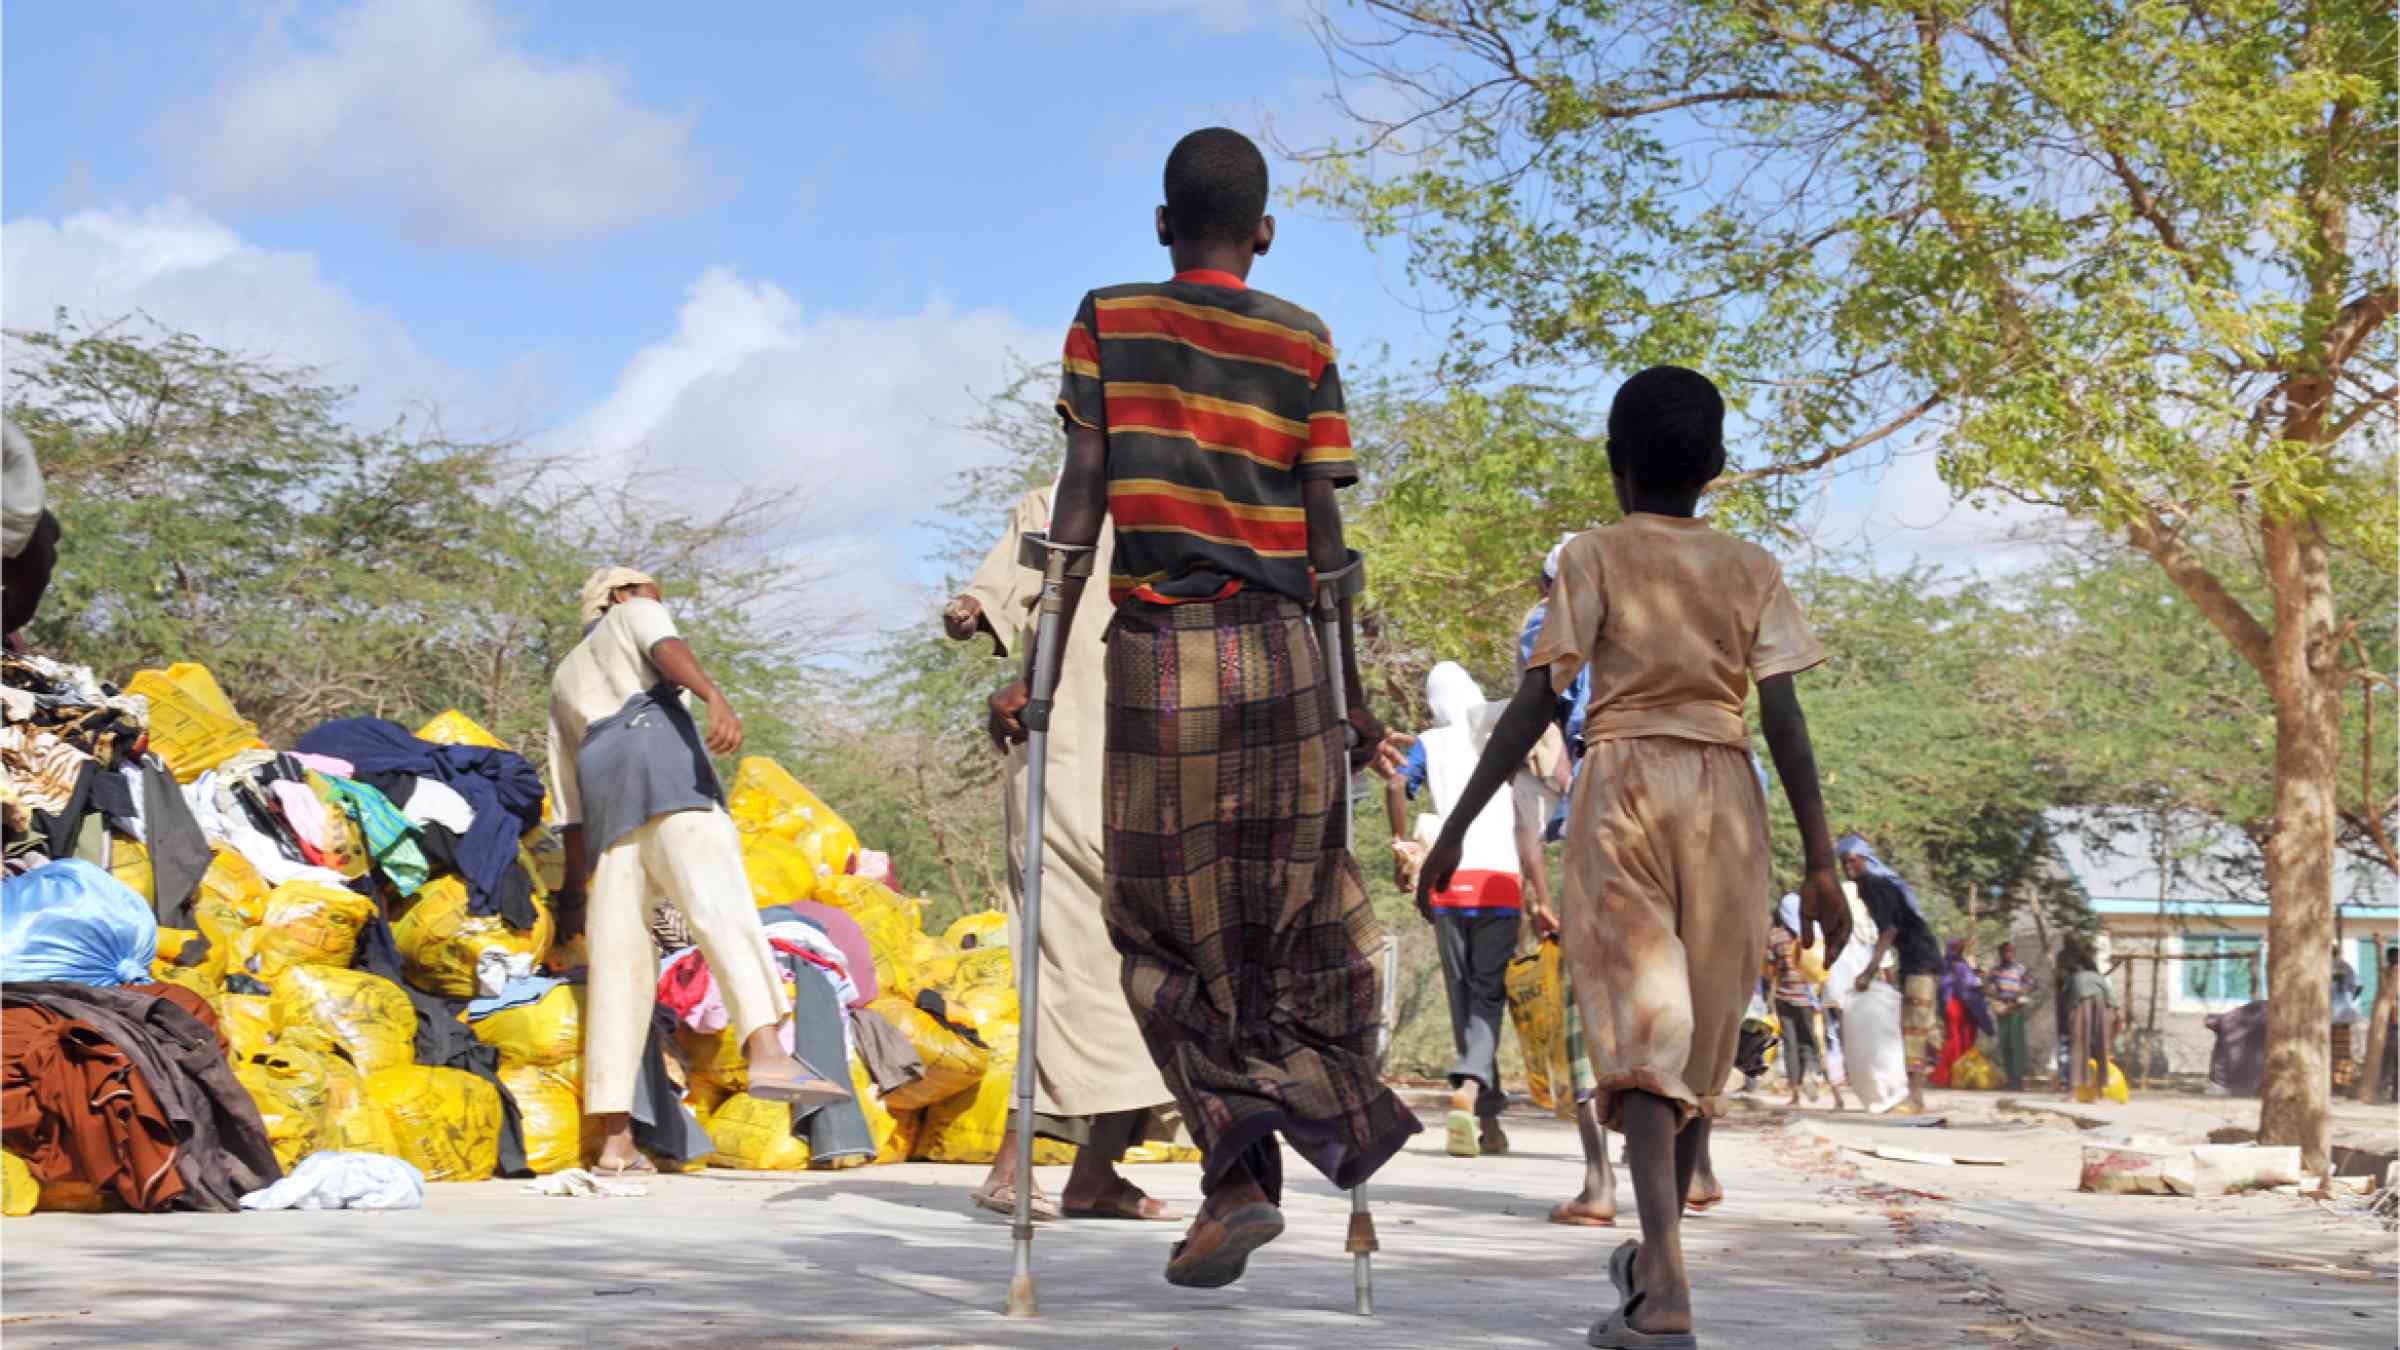 This picture shows a boy with crutches in the Dadaab refugee camp in Somalia.